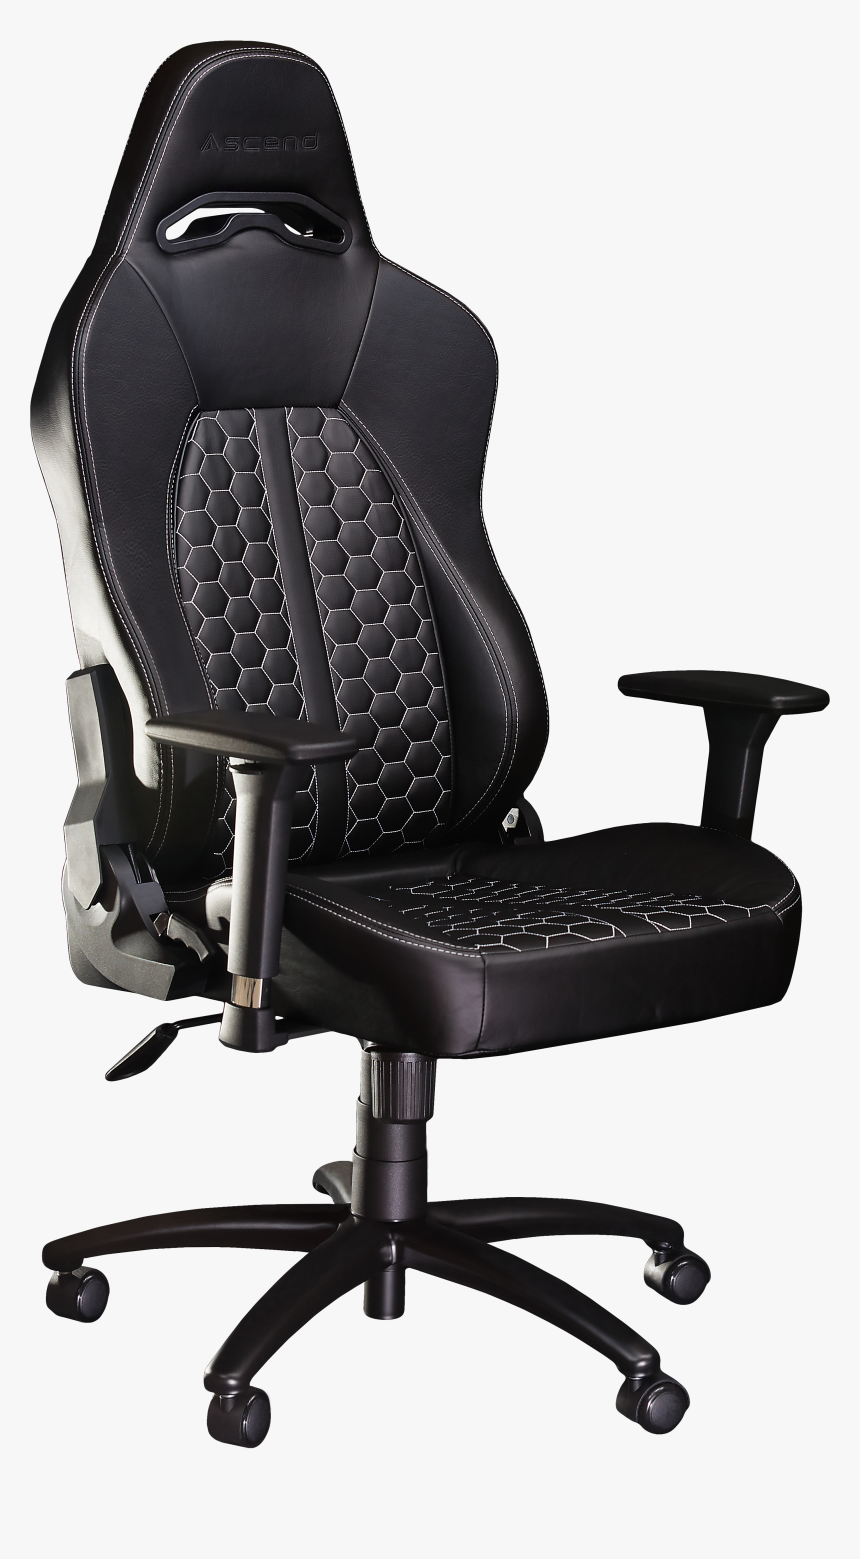 Chair Top View Png, Transparent Png, Free Download